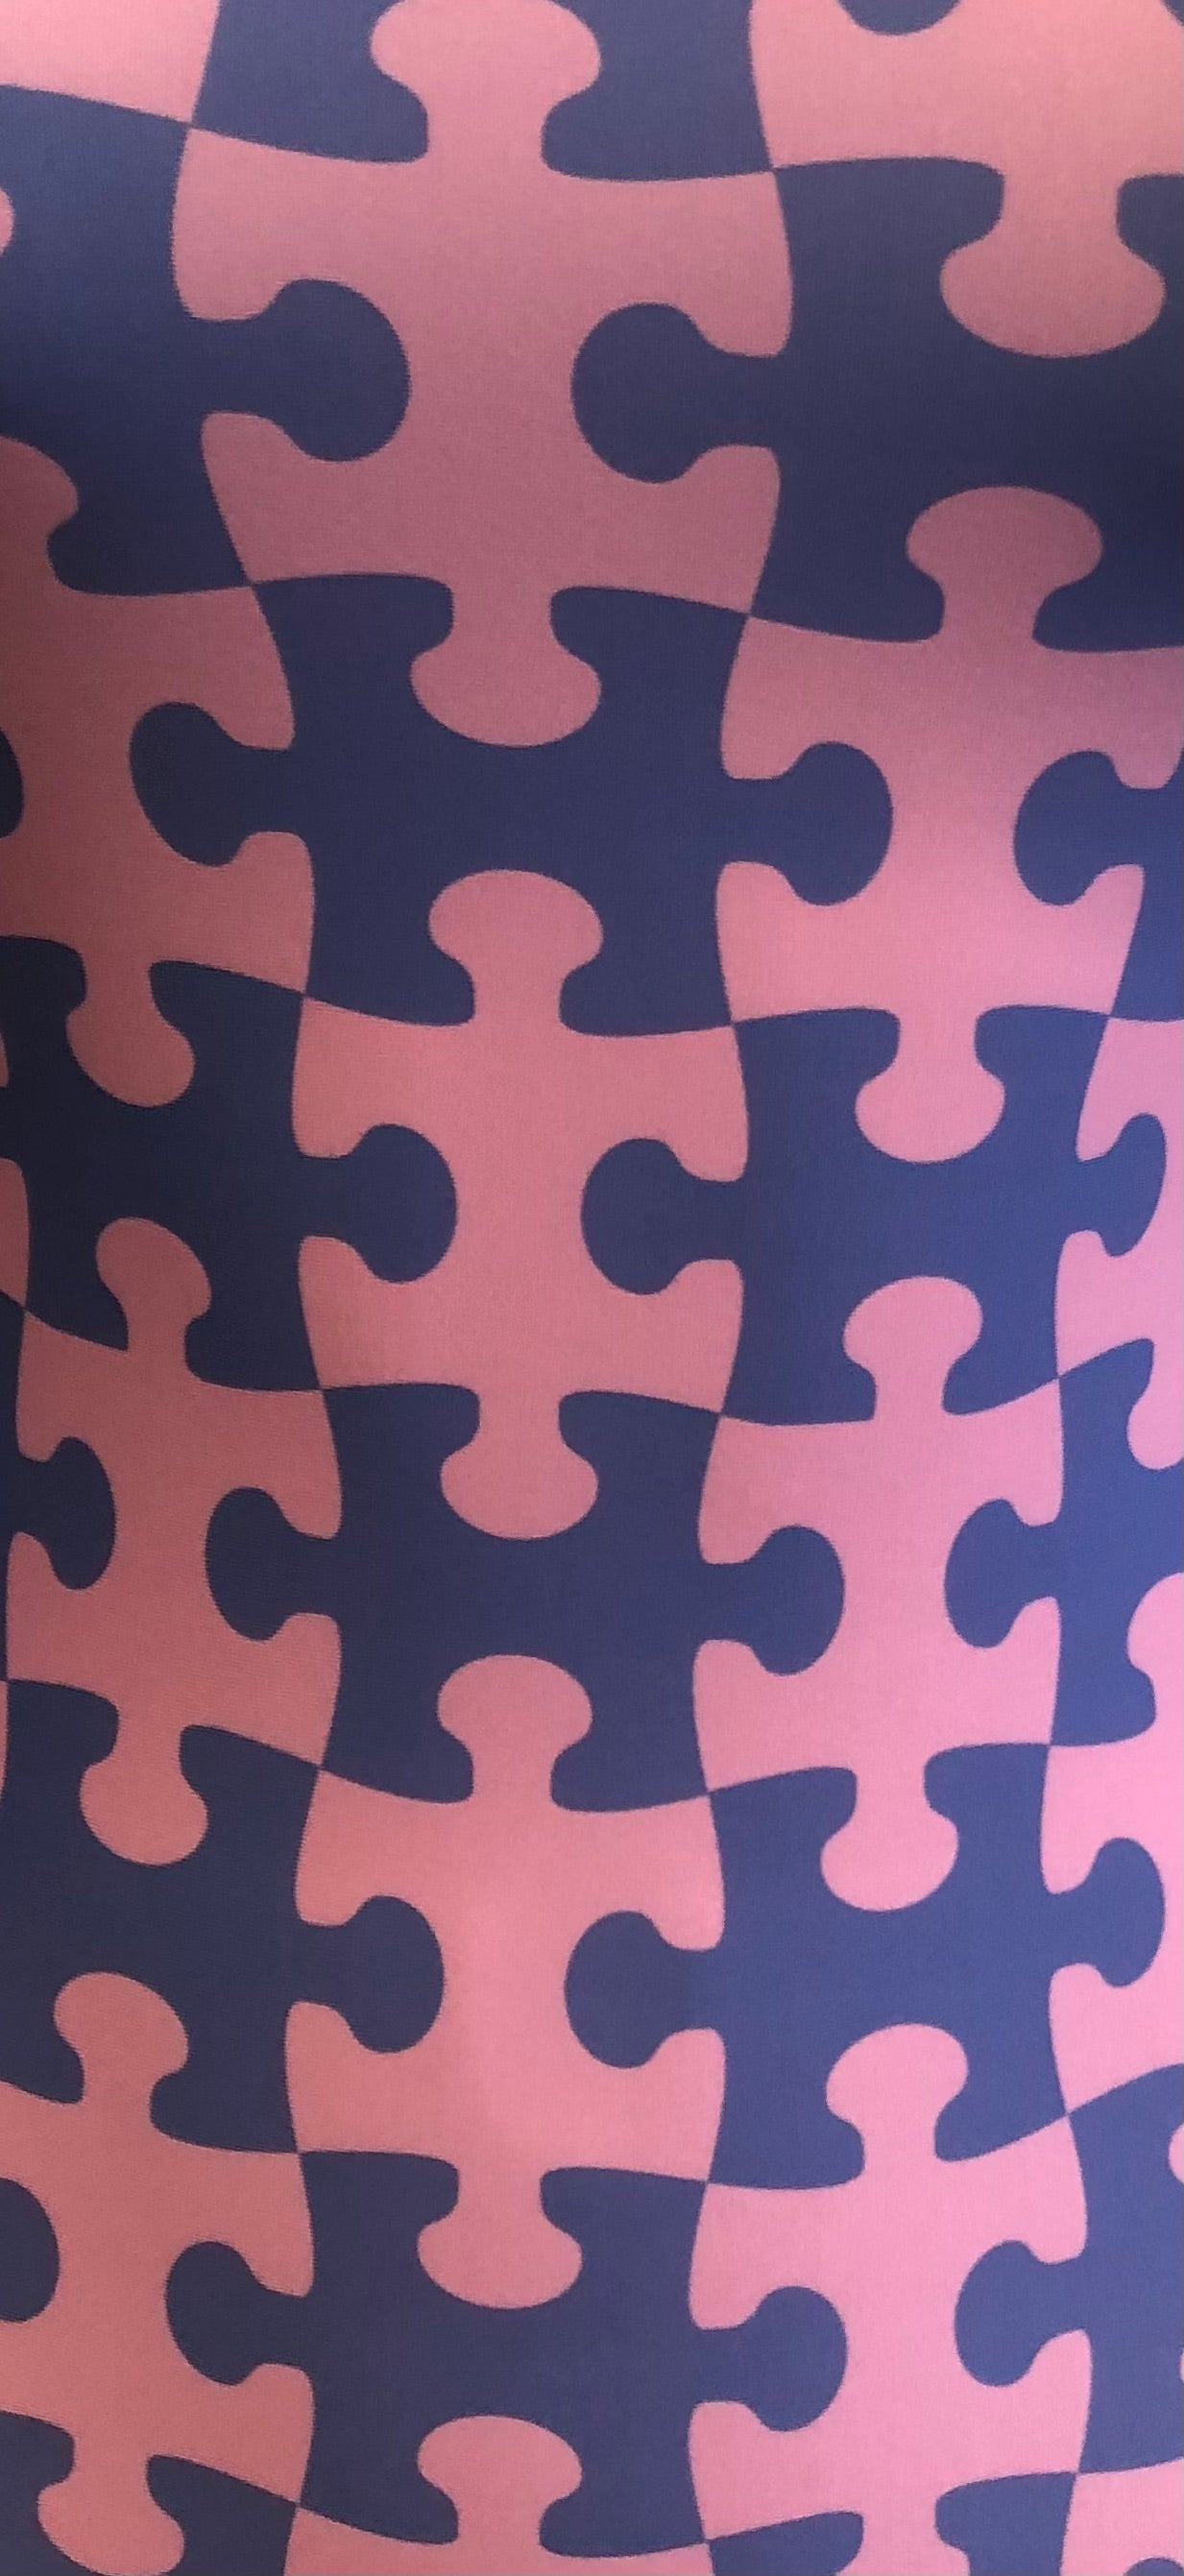 Pink and purple puzzles